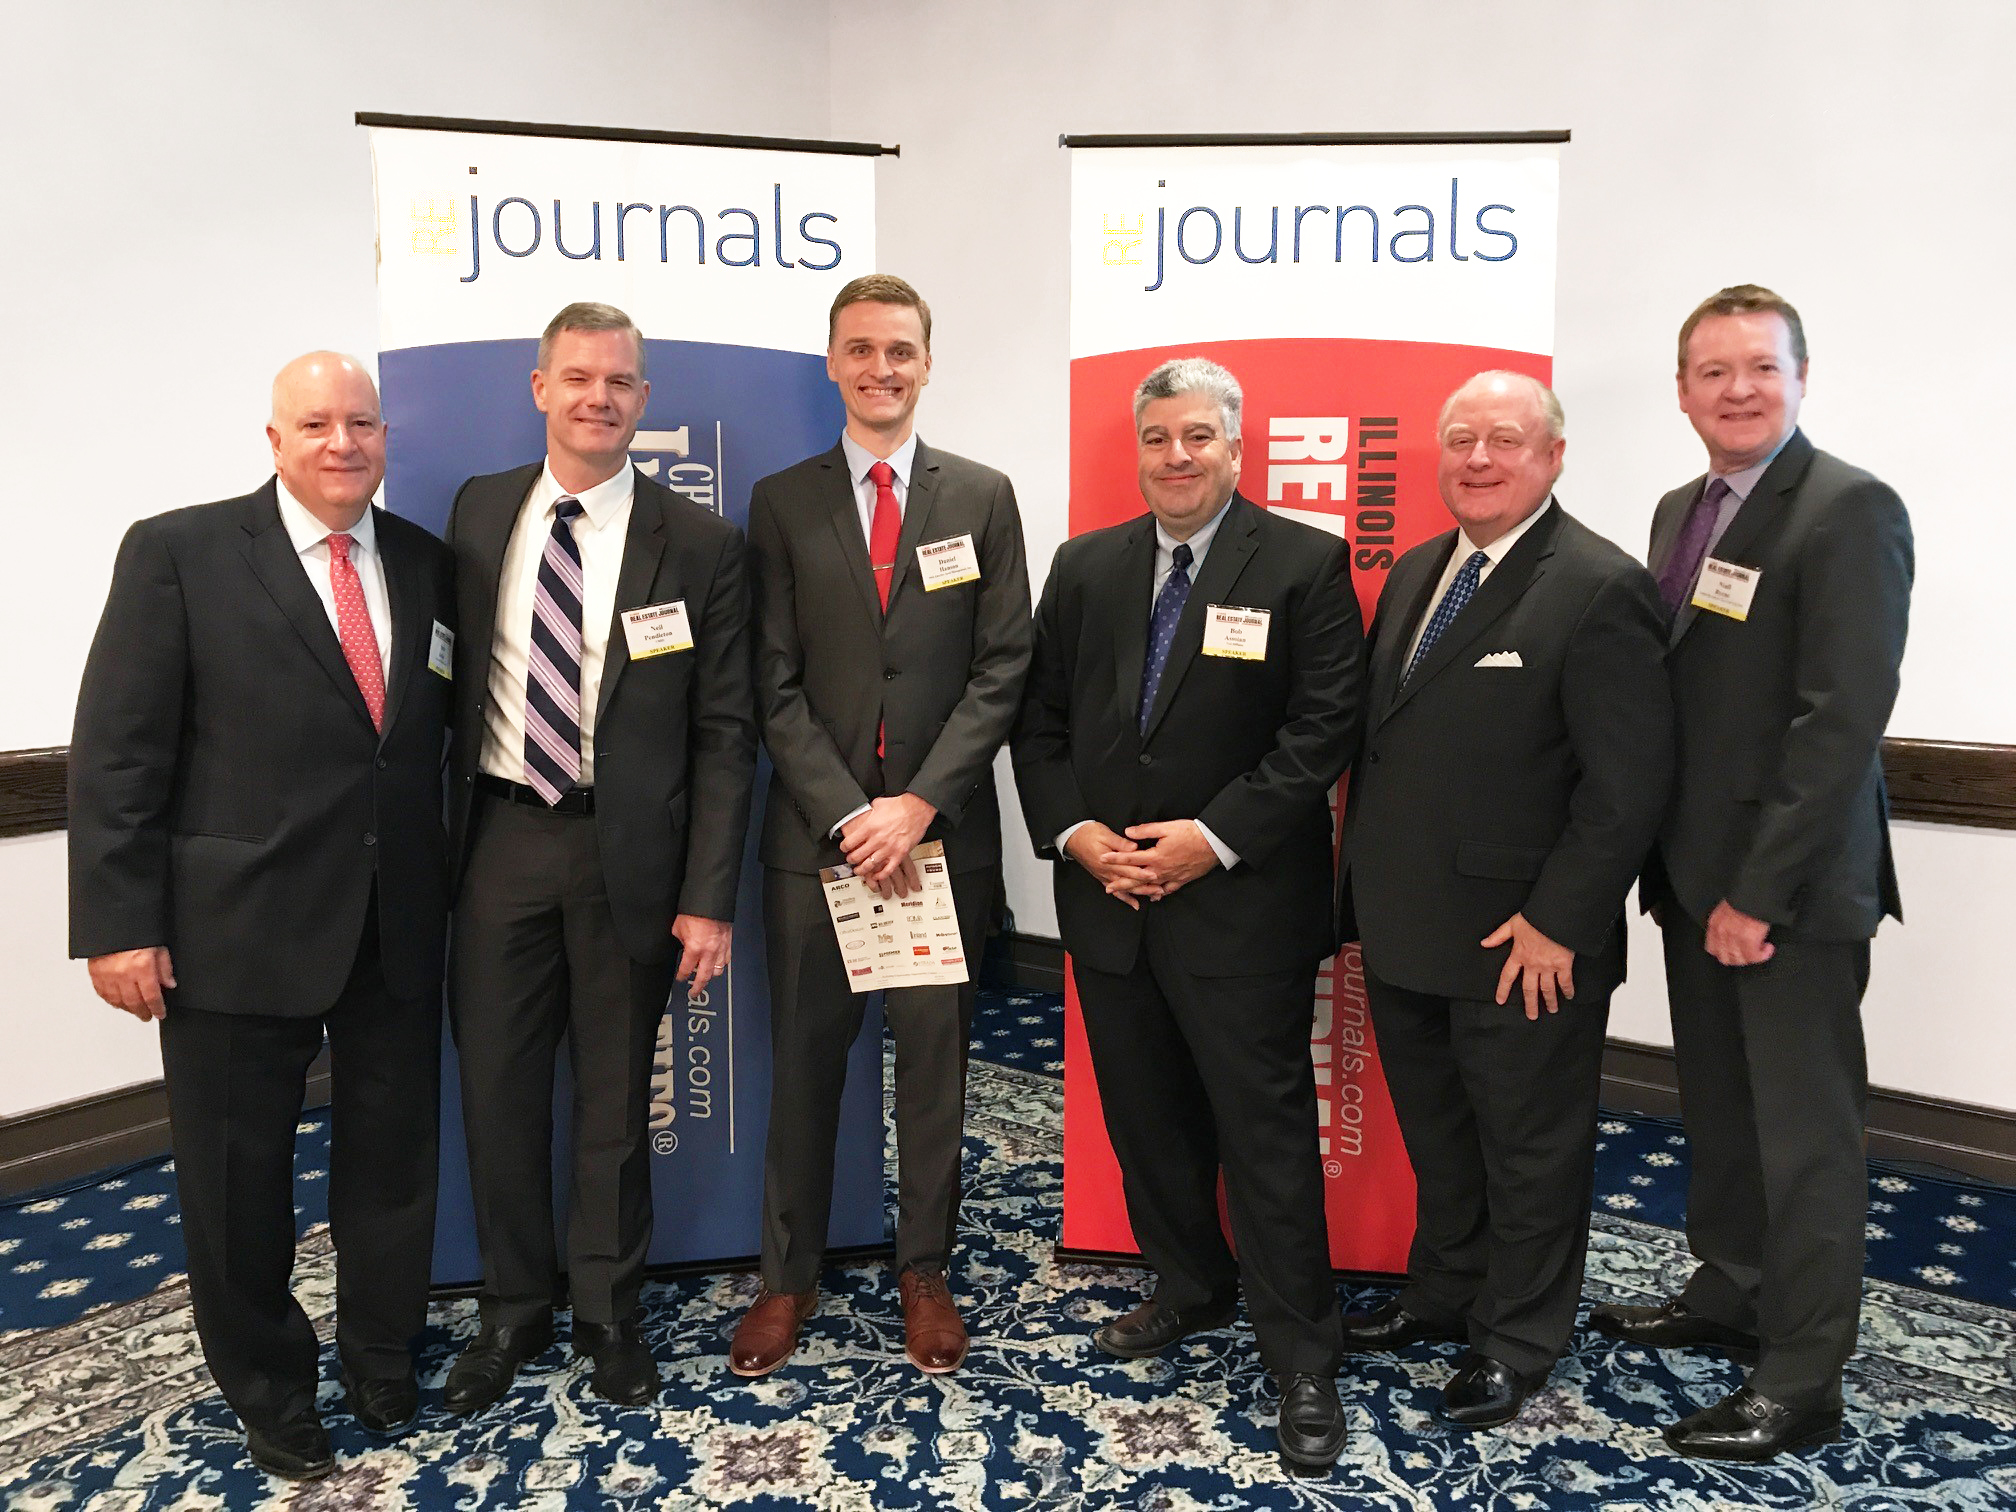  Pictured above, from left to right: Sam Delisi, NGKF; Neil Pendleton, CBRE; Daniel Hanson, Mid-America Asset Management, Inc.; Bob Assoian, NAI Hiffman; Bob Six, Zeller Realty Group; Niall Byrne, Inland Investment Real Estate Services. 